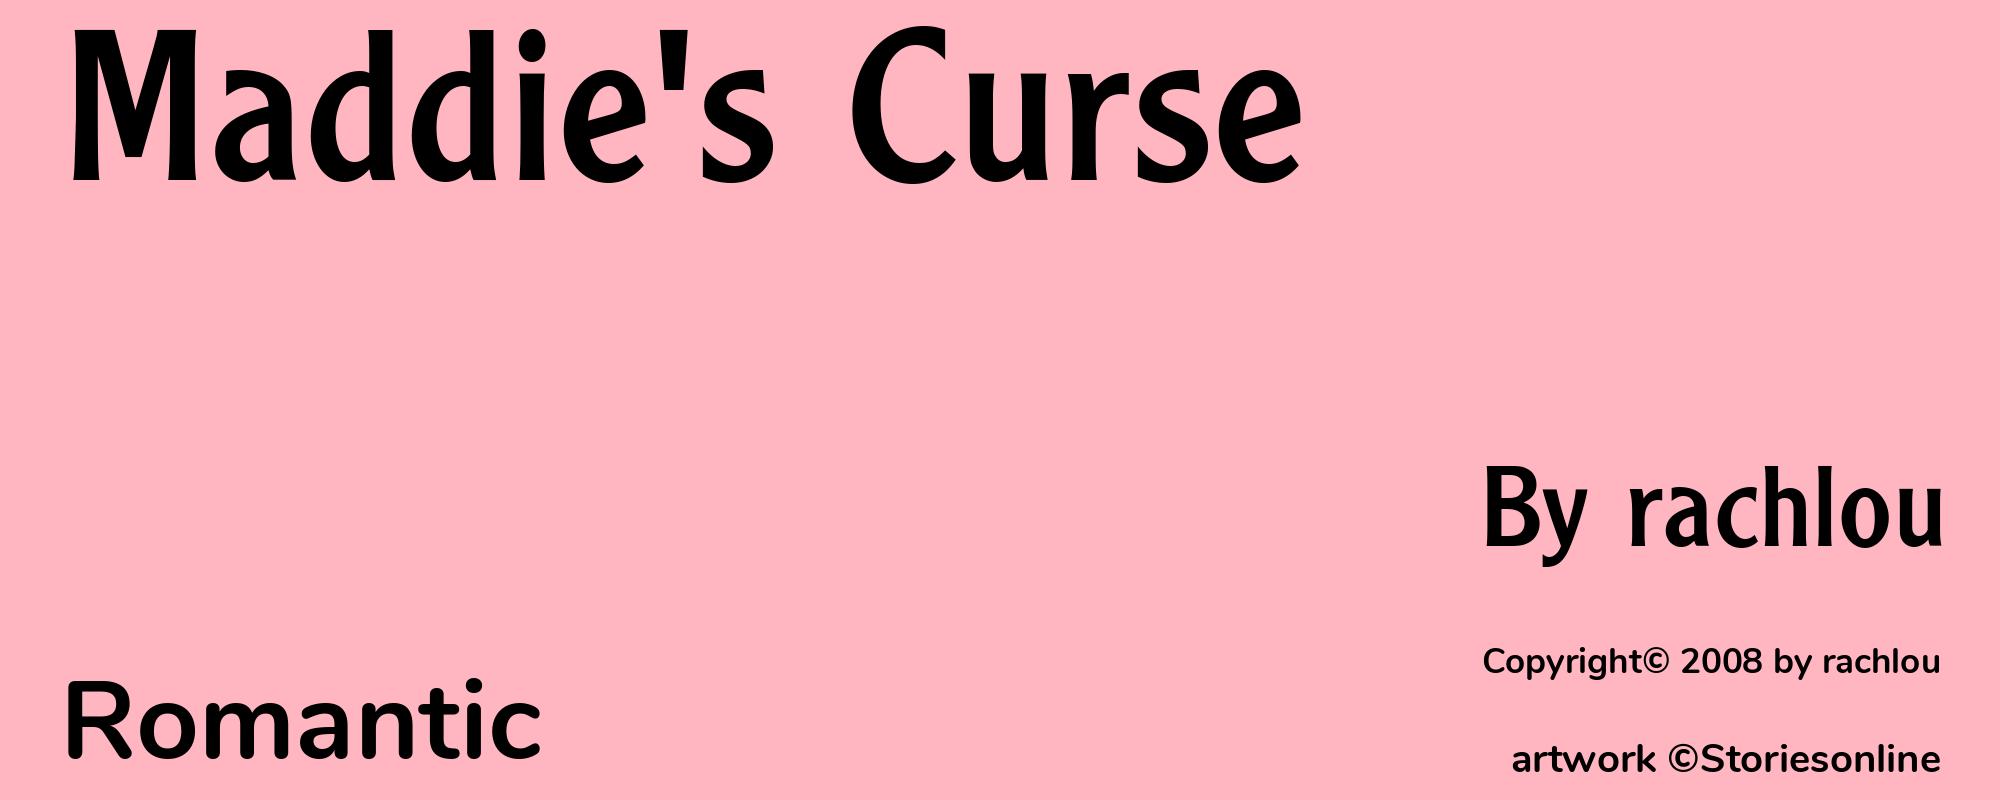 Maddie's Curse - Cover